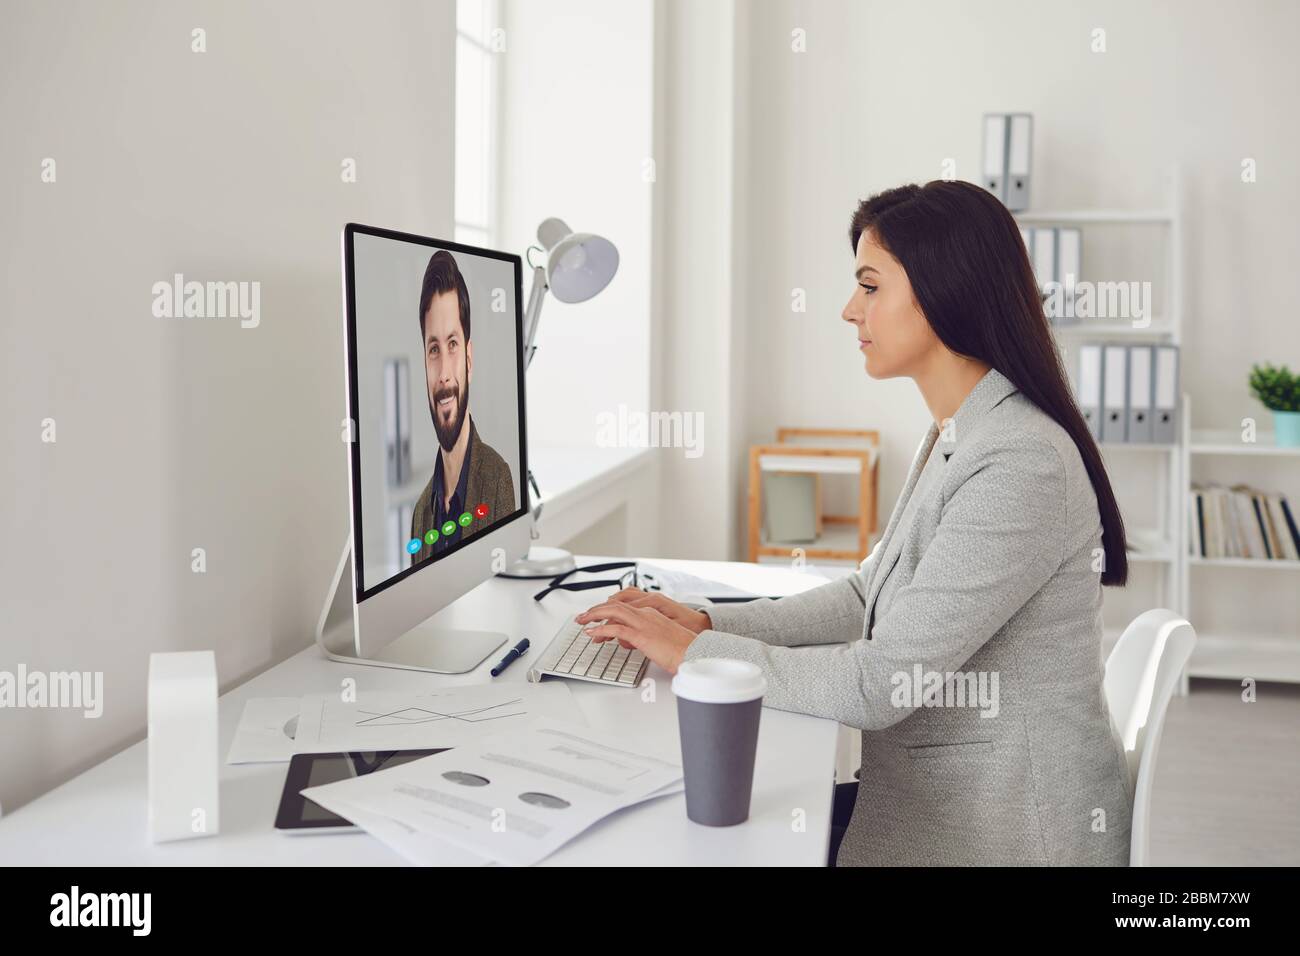 Work online. A business woman is sitting working at a computer at home indoors. Stock Photo